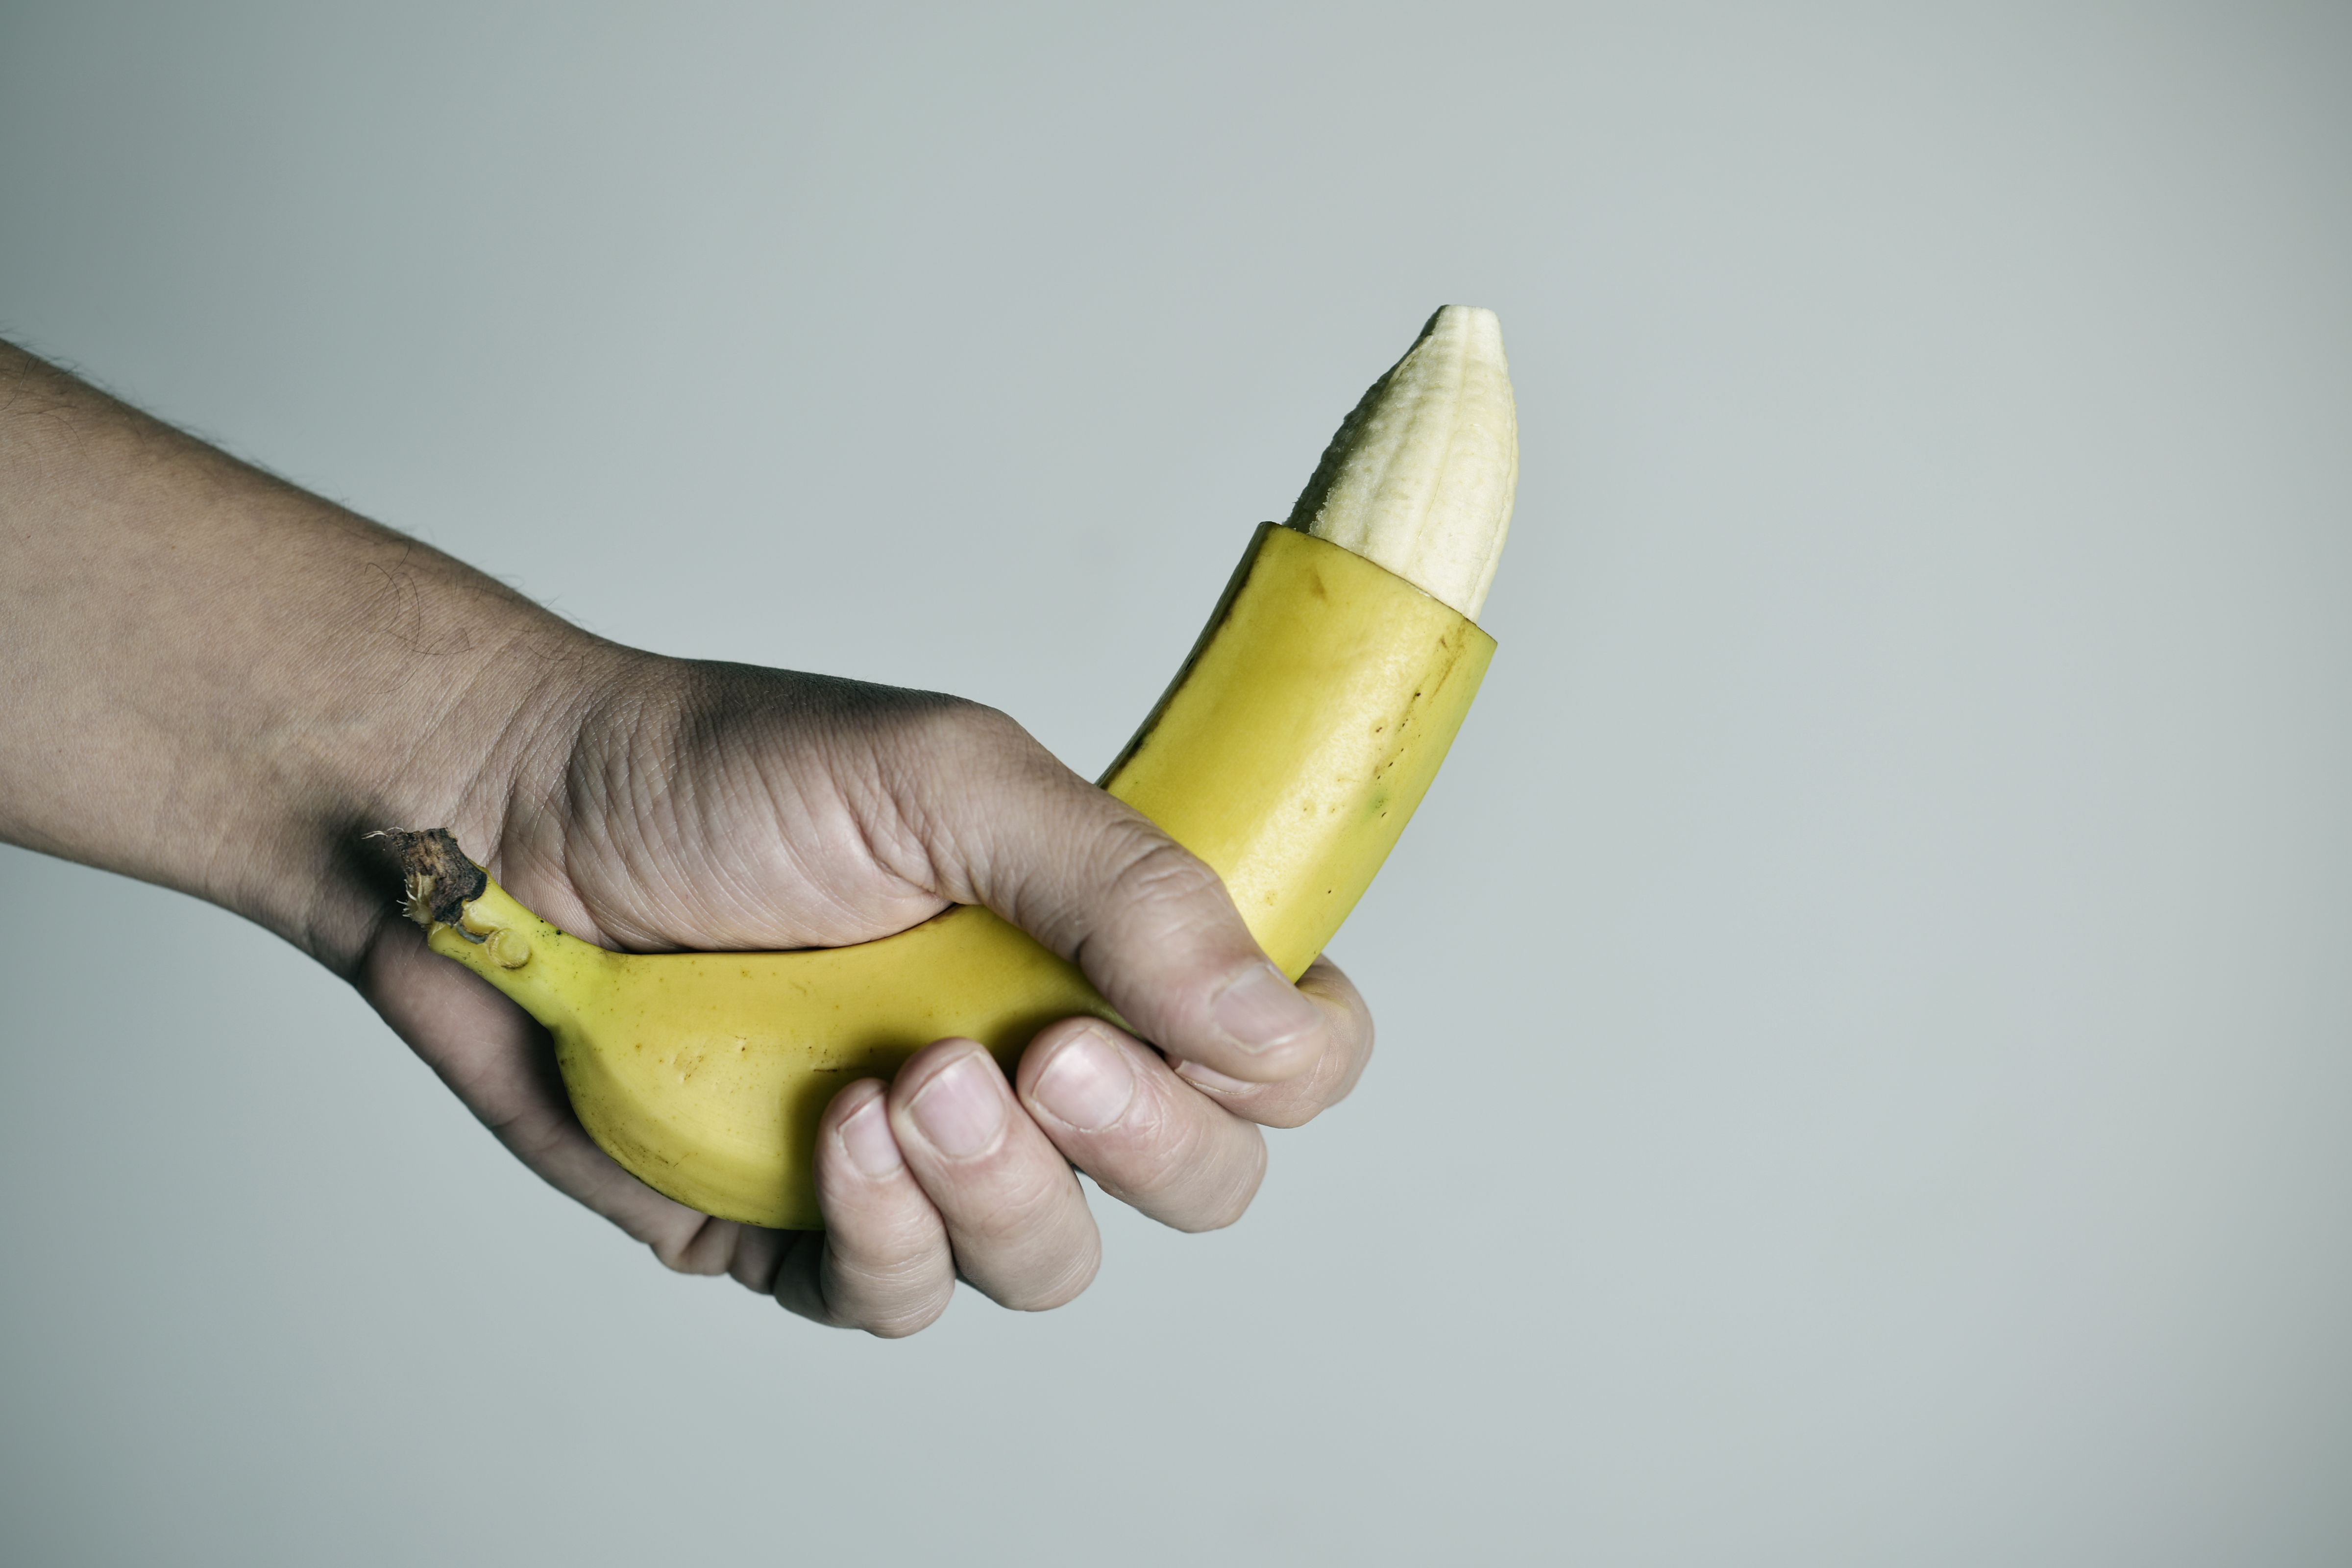 How Adult Circumcision Affects Your Sex Life, According to Experts pic